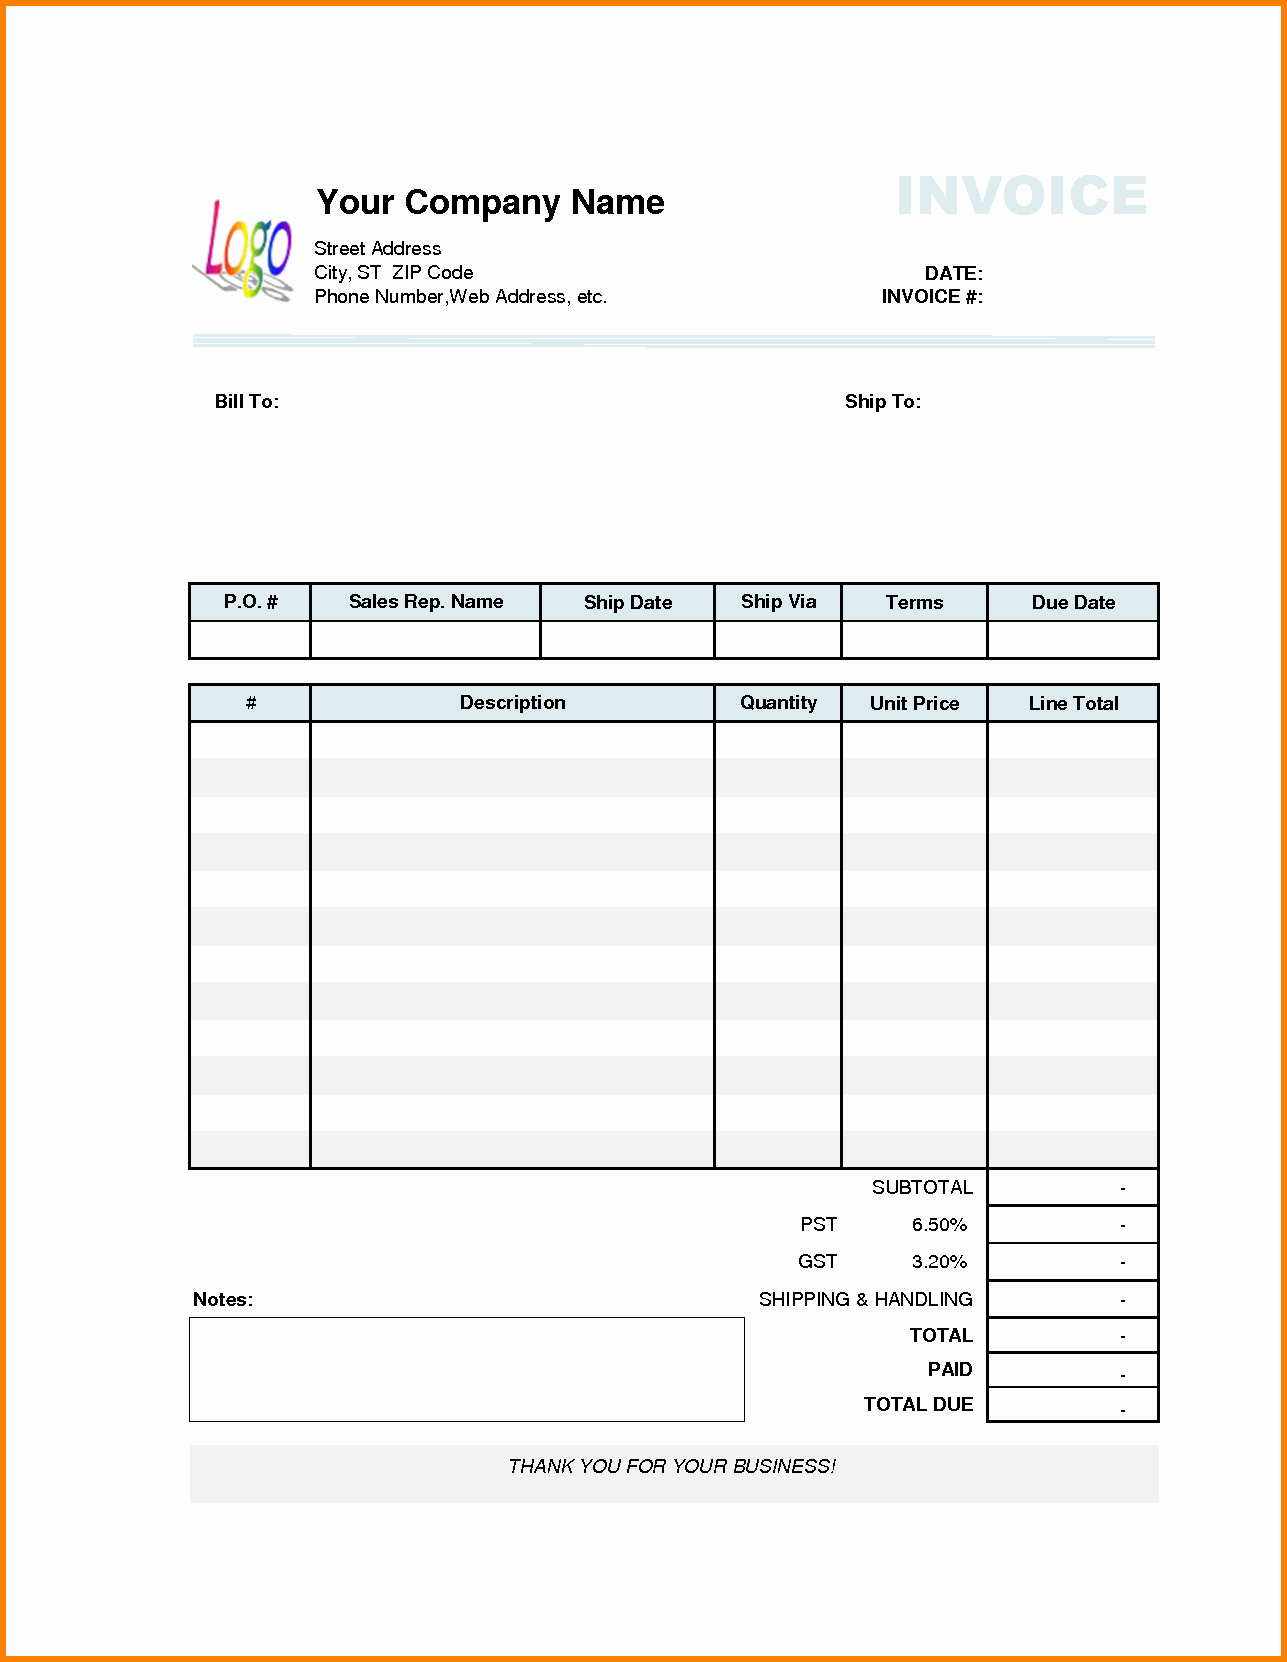 Paid In Full Invoice Template Awesome Paid In Full Receipt Template Portablegasgrillweber